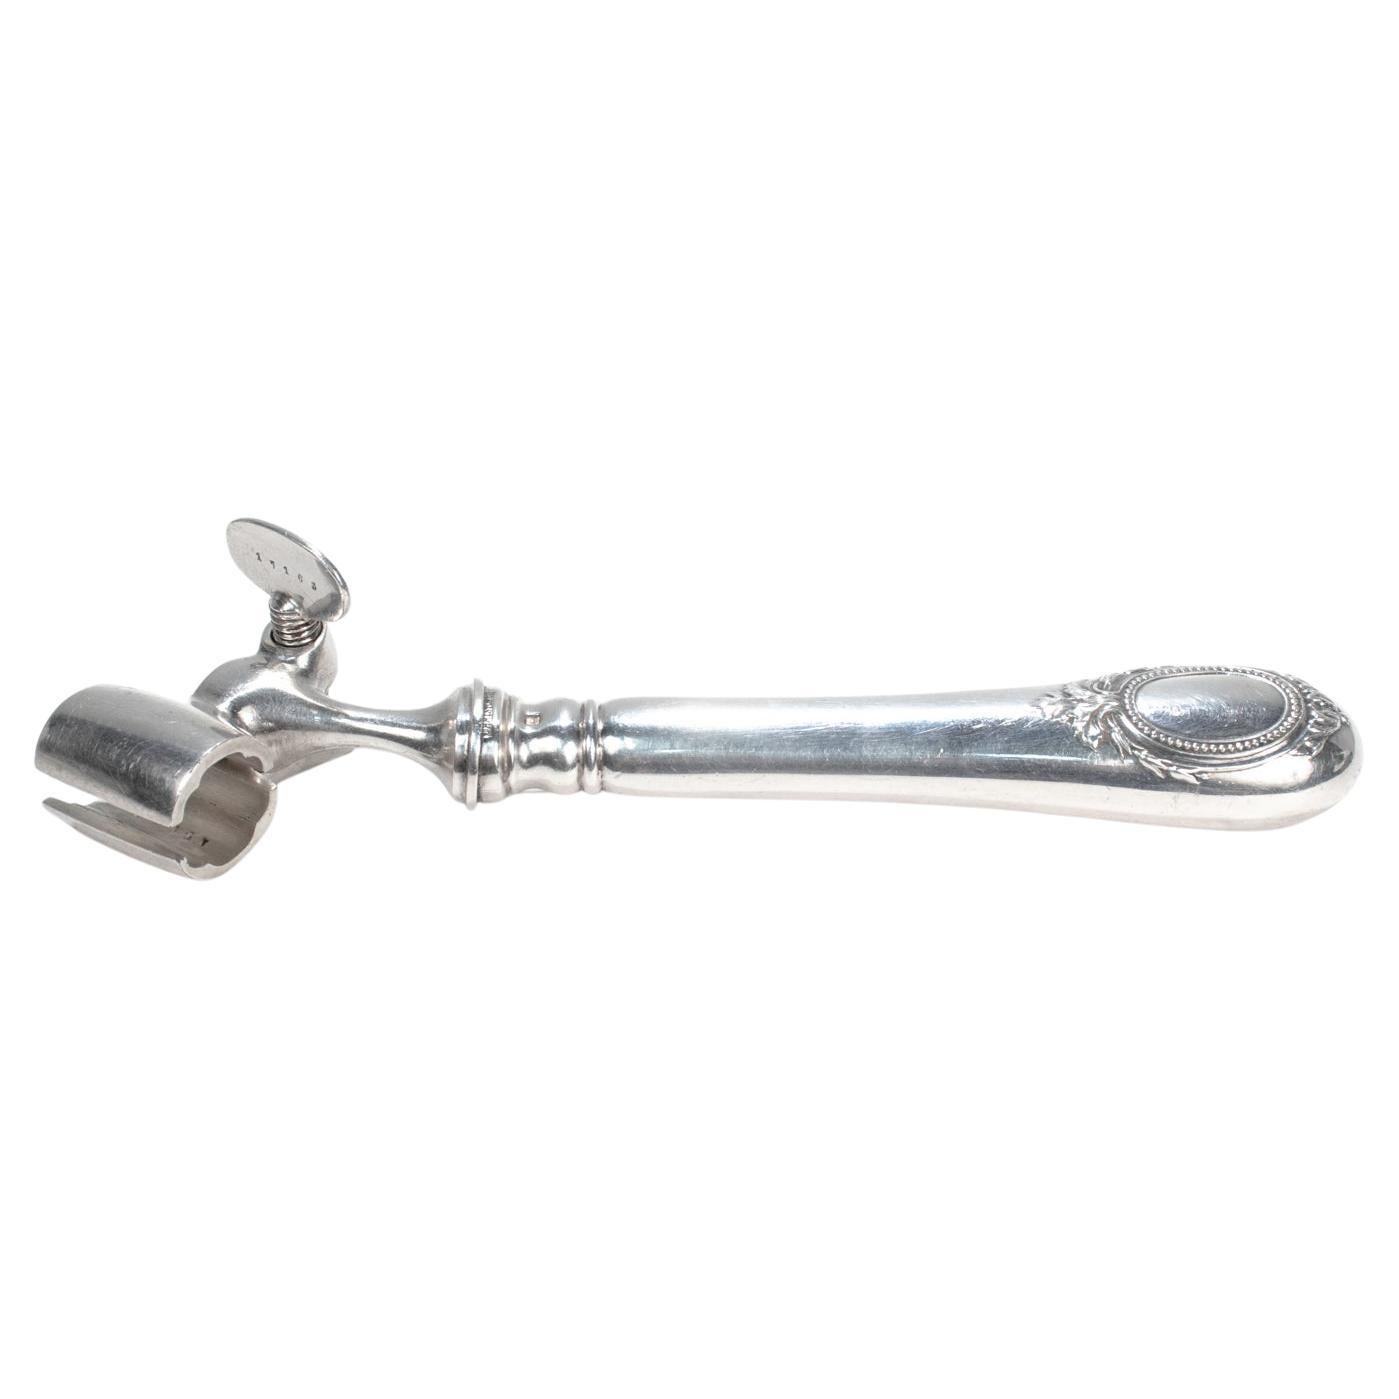 A fine antique Manche a Gigot bone holder.

By Christofle et Cie.

In silver plate. 

In the Baguette pattern.

With an embossed medallion or wreath to the hollow handle handle and a threaded, silver plated bone holder to the top.

Mark for